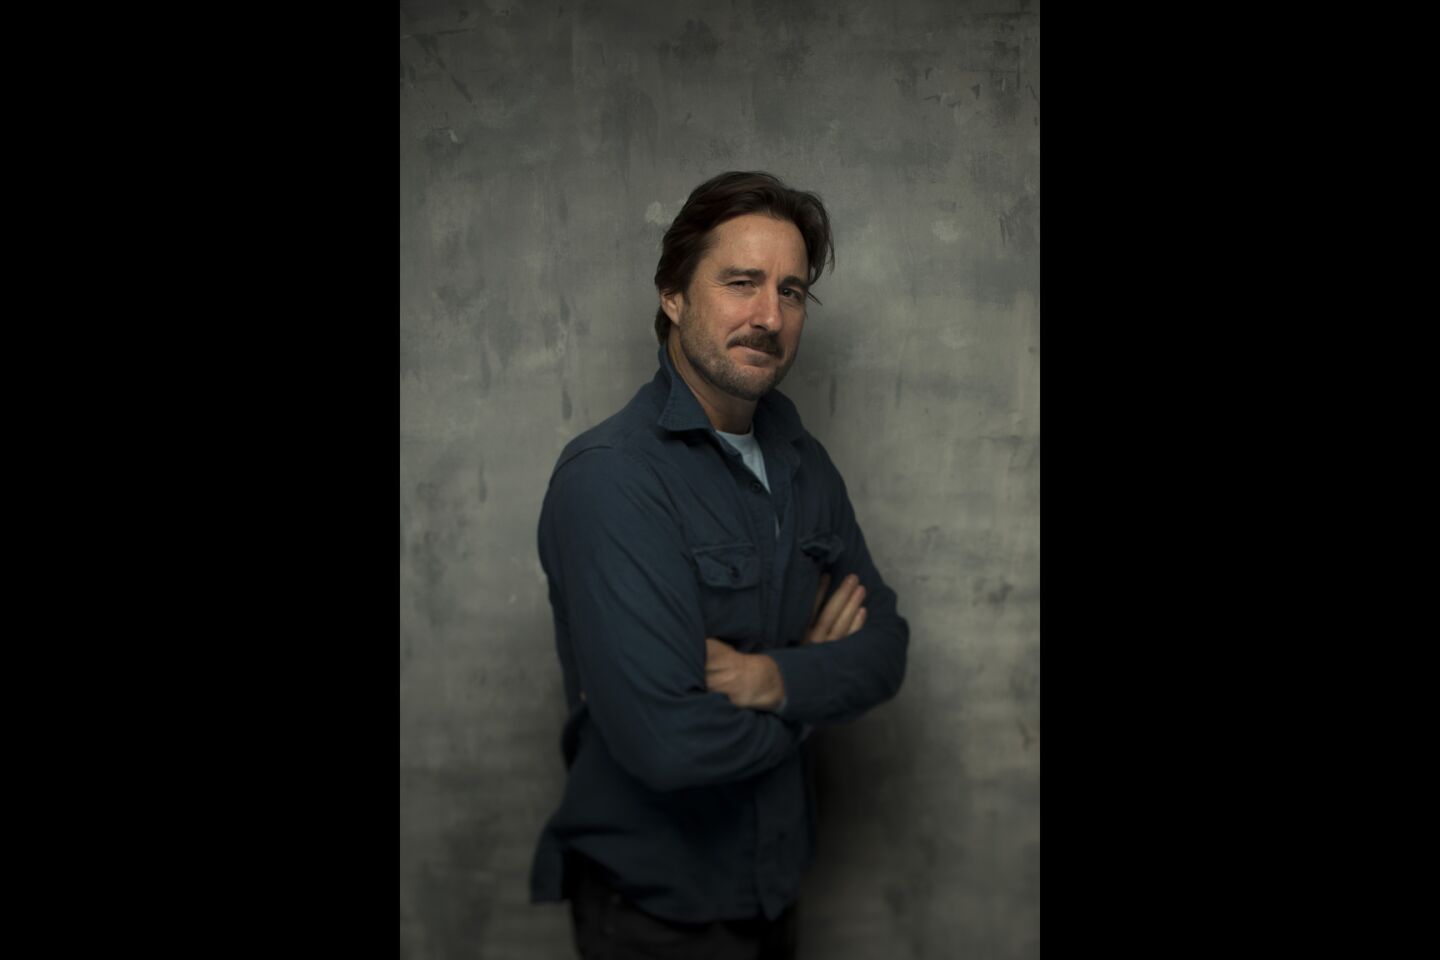 PARK CITY,UTAH --SATURDAY, JANUARY 20, 2018-- Actor Luke Wilson, from the film, "Arizona," photographed in the L.A. Times Studio at Chase Sapphire on Main, during the Sundance Film Festival in Park City, Utah, Jan. 20, 2018. (Jay L. Clendenin / Los Angeles Times)